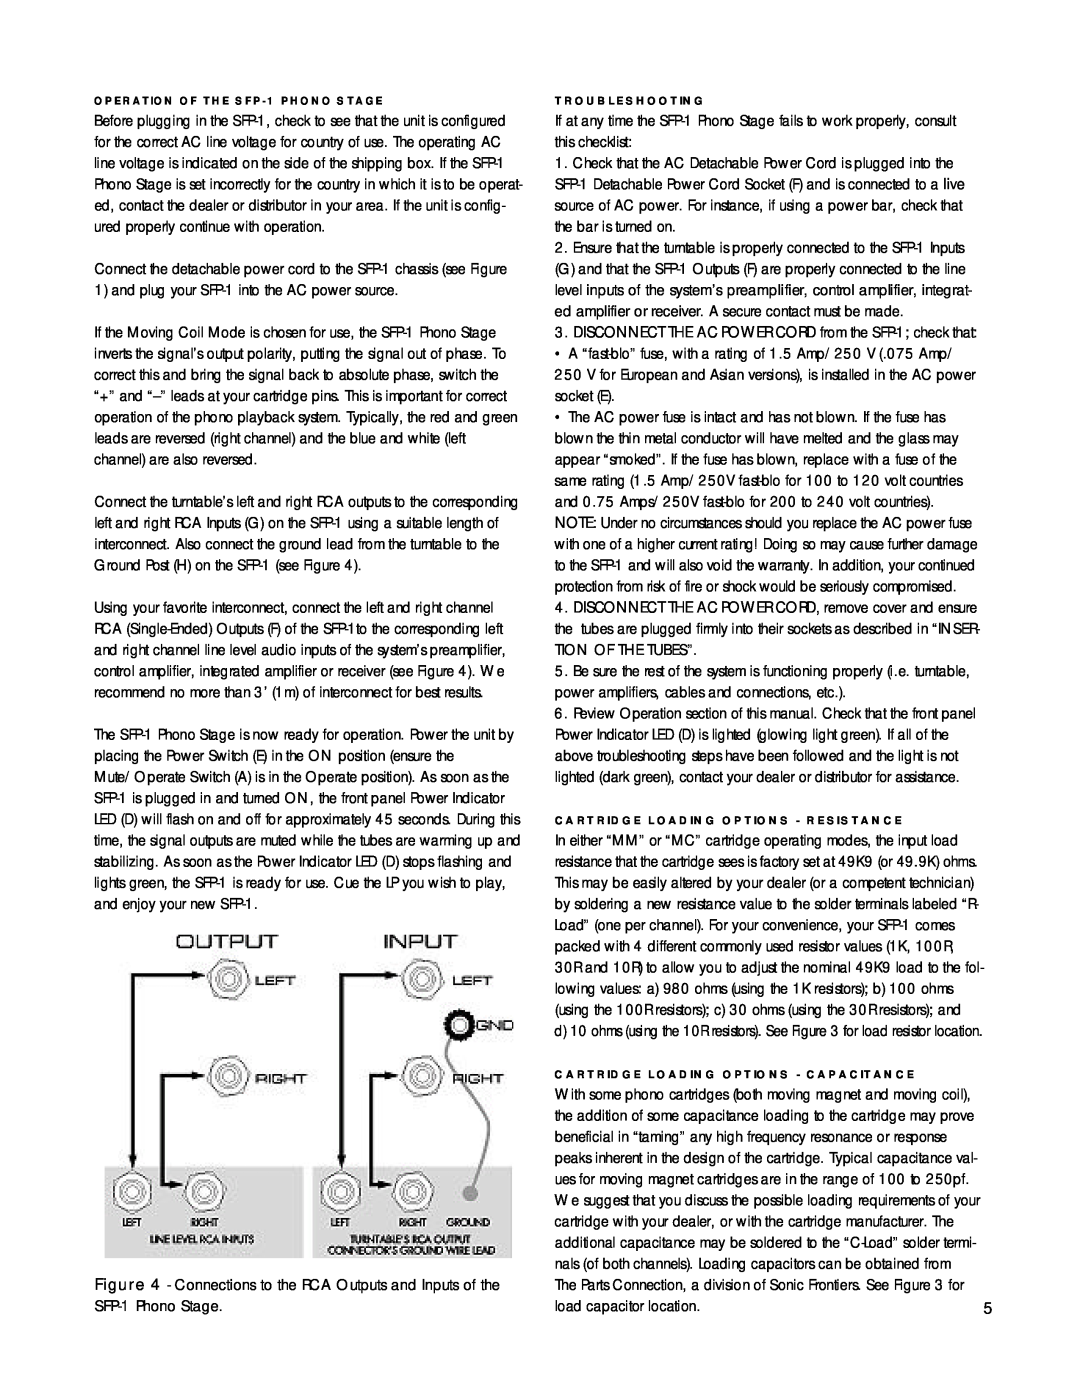 Anthem Audio SFP-1 owner manual Tion Of The Tubes” 